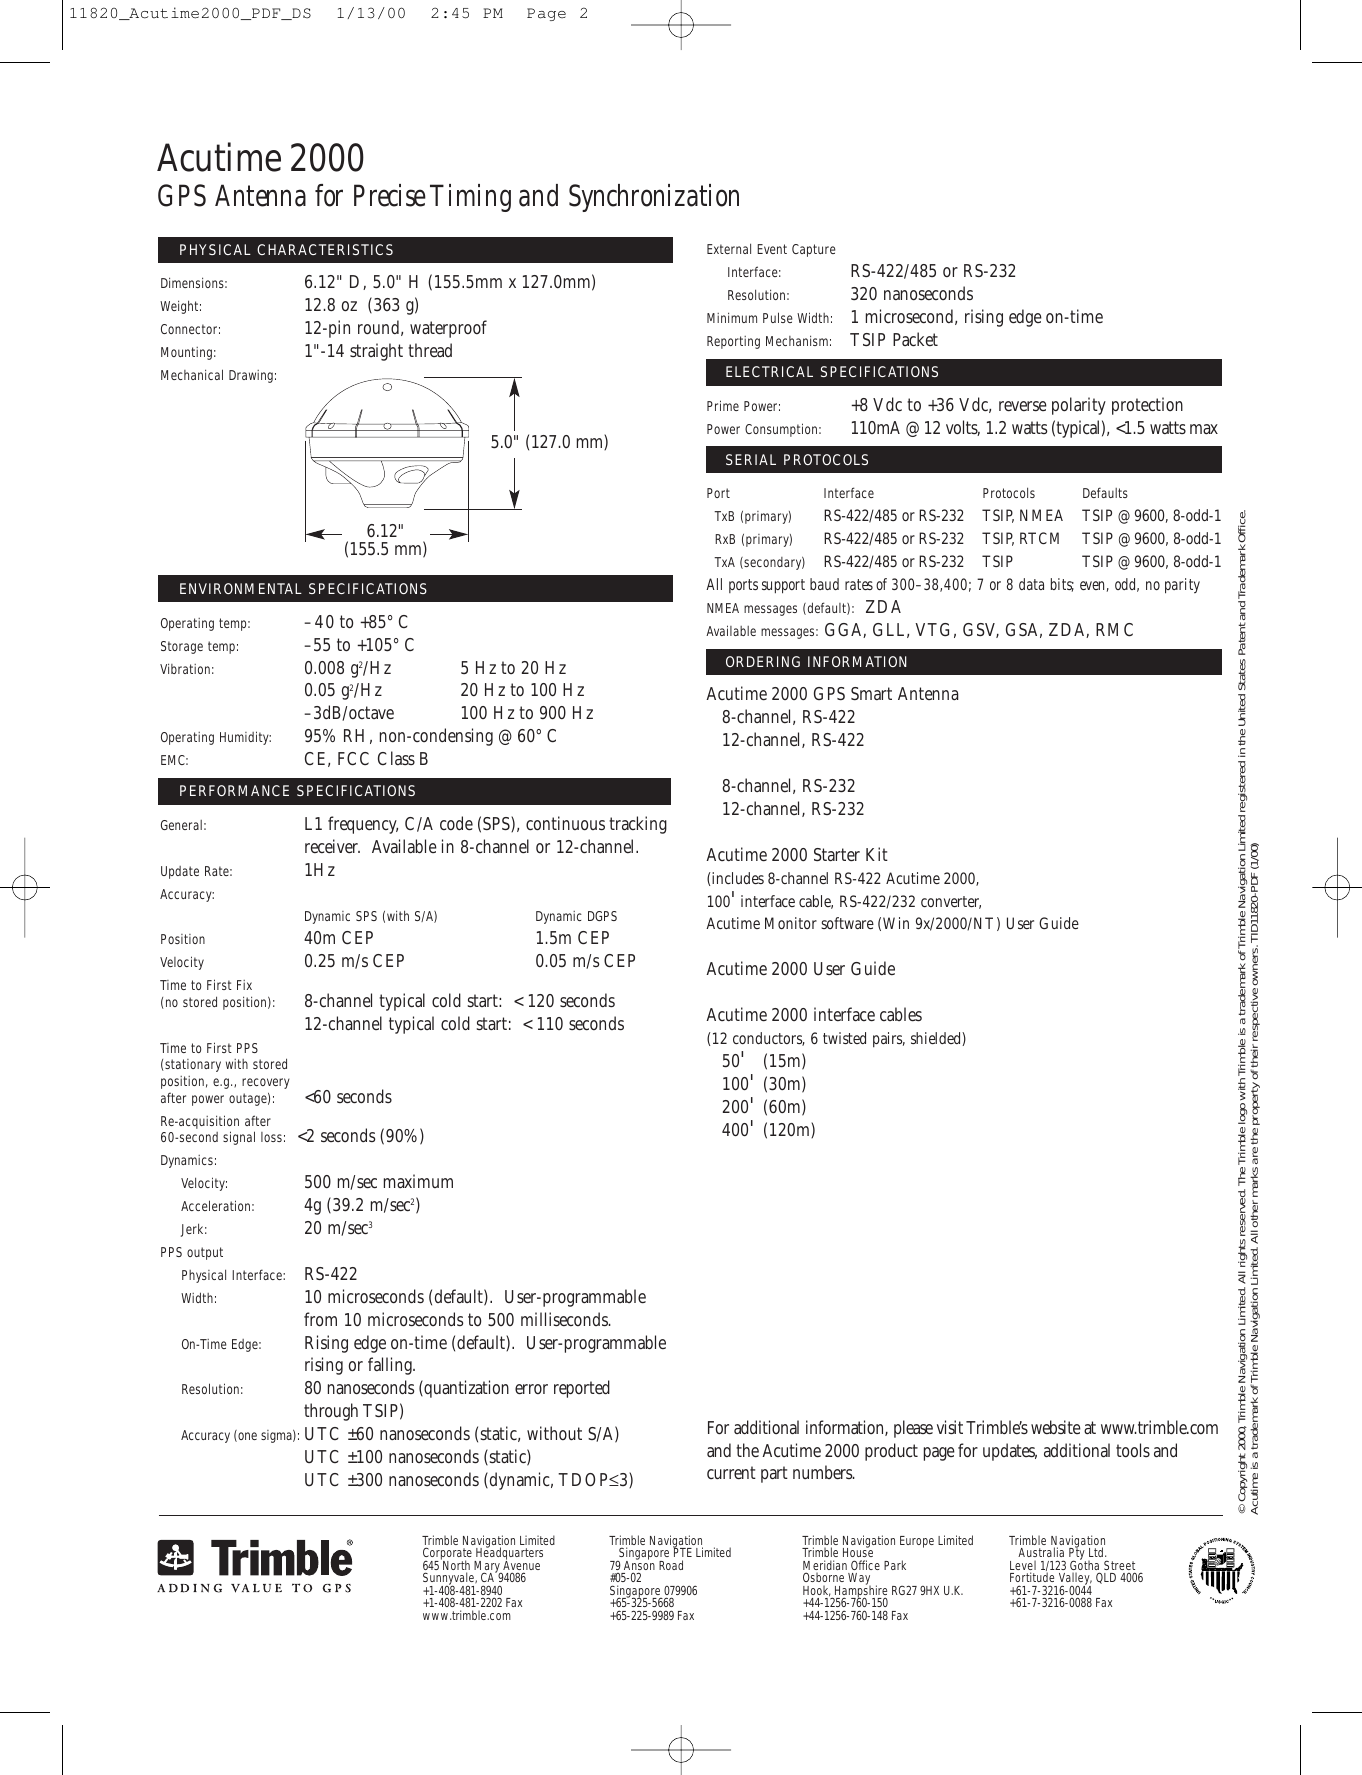 Page 2 of 2 - Trimble-Outdoors Trimble-Outdoors-Acutime-2000-Users-Manual- 11820_Acutime2000_PDF_DS  Trimble-outdoors-acutime-2000-users-manual